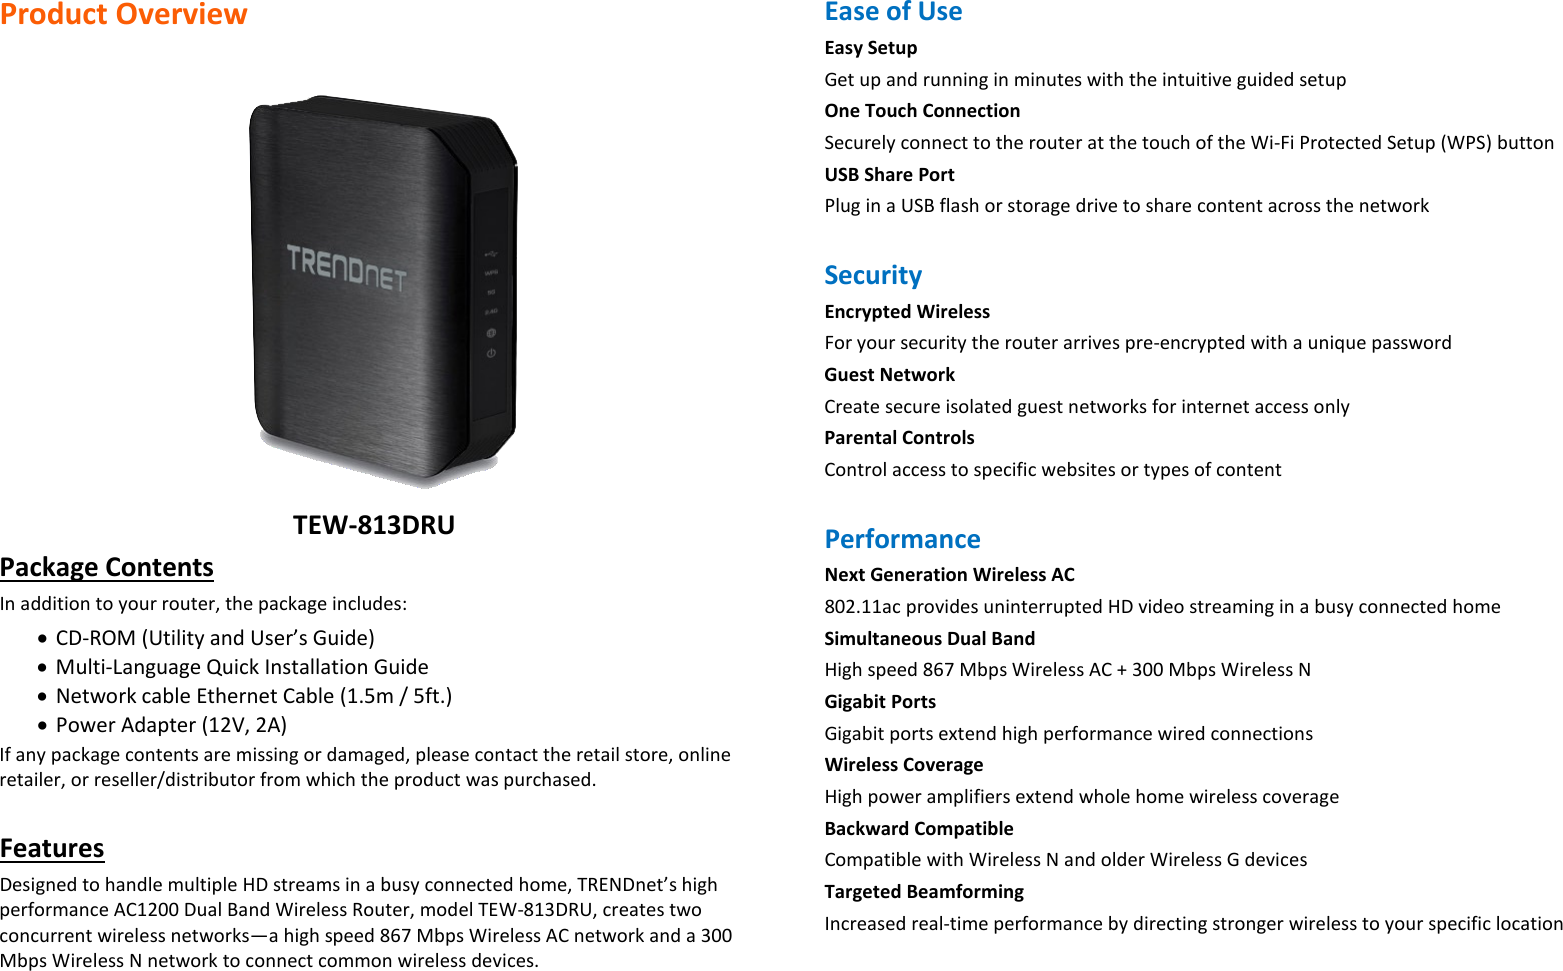 Product Overview   TEW-813DRU Package Contents In addition to your router, the package includes: • CD-ROM (Utility and User’s Guide) • Multi-Language Quick Installation Guide • Network cable Ethernet Cable (1.5m / 5ft.) • Power Adapter (12V, 2A) If any package contents are missing or damaged, please contact the retail store, online retailer, or reseller/distributor from which the product was purchased.  Features  Designed to handle multiple HD streams in a busy connected home, TRENDnet’s high performance AC1200 Dual Band Wireless Router, model TEW-813DRU, creates two concurrent wireless networks—a high speed 867 Mbps Wireless AC network and a 300 Mbps Wireless N network to connect common wireless devices.   Ease of Use  Easy Setup Get up and running in minutes with the intuitive guided setup One Touch Connection Securely connect to the router at the touch of the Wi-Fi Protected Setup (WPS) button USB Share Port  Plug in a USB flash or storage drive to share content across the network  Security  Encrypted Wireless For your security the router arrives pre-encrypted with a unique password Guest Network  Create secure isolated guest networks for internet access only Parental Controls Control access to specific websites or types of content  Performance Next Generation Wireless AC 802.11ac provides uninterrupted HD video streaming in a busy connected home  Simultaneous Dual Band High speed 867 Mbps Wireless AC + 300 Mbps Wireless N Gigabit Ports  Gigabit ports extend high performance wired connections Wireless Coverage High power amplifiers extend whole home wireless coverage Backward Compatible Compatible with Wireless N and older Wireless G devices Targeted Beamforming Increased real-time performance by directing stronger wireless to your specific location  